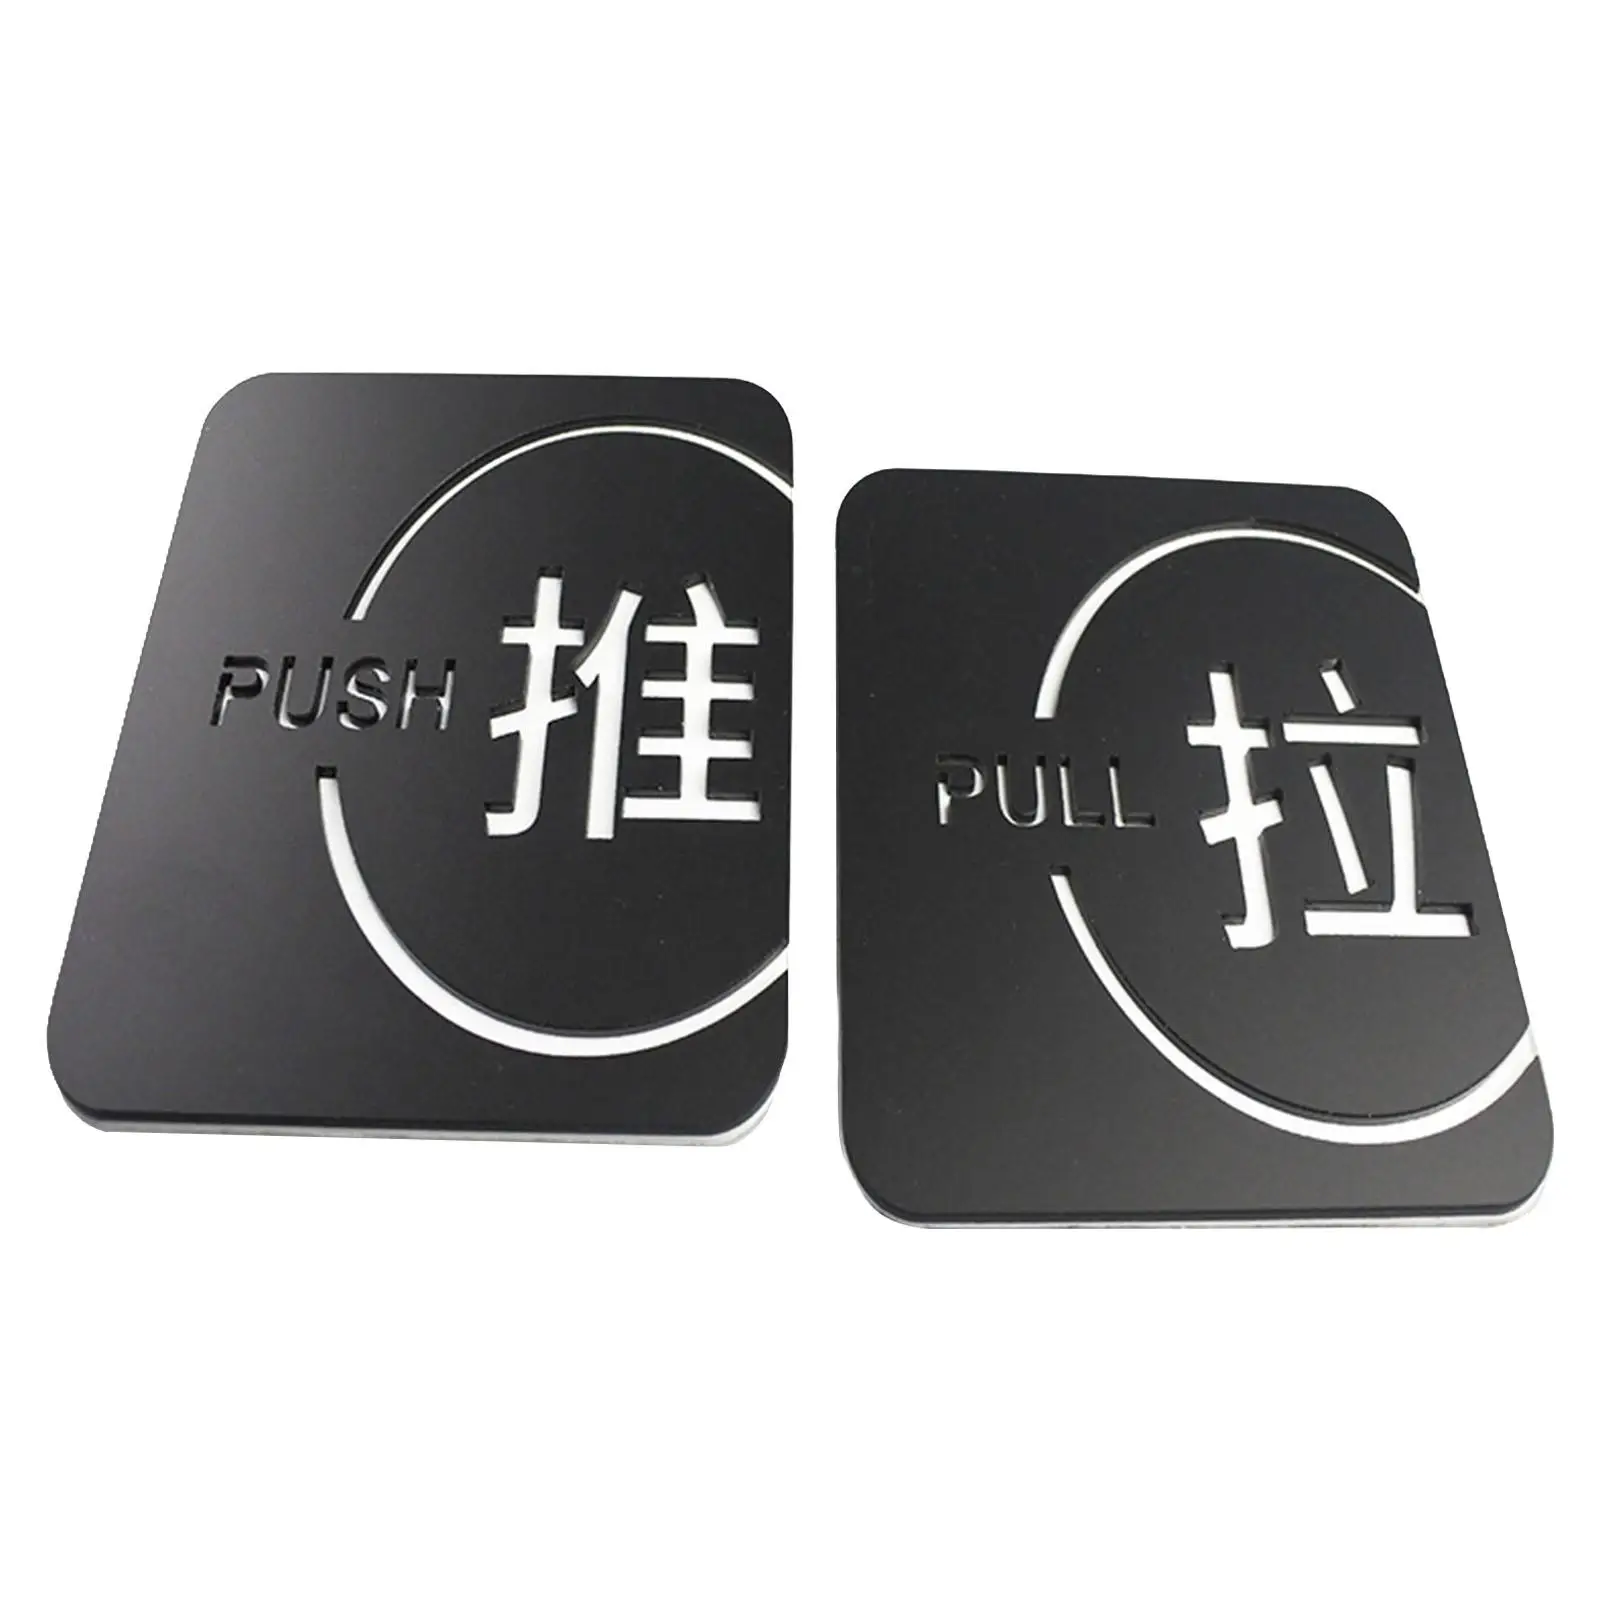 Acrylic Push Pull Door Stickers Sign with Adhesive Tape Fade Resistant Signage Signpost for Restaurant Cafes hotel